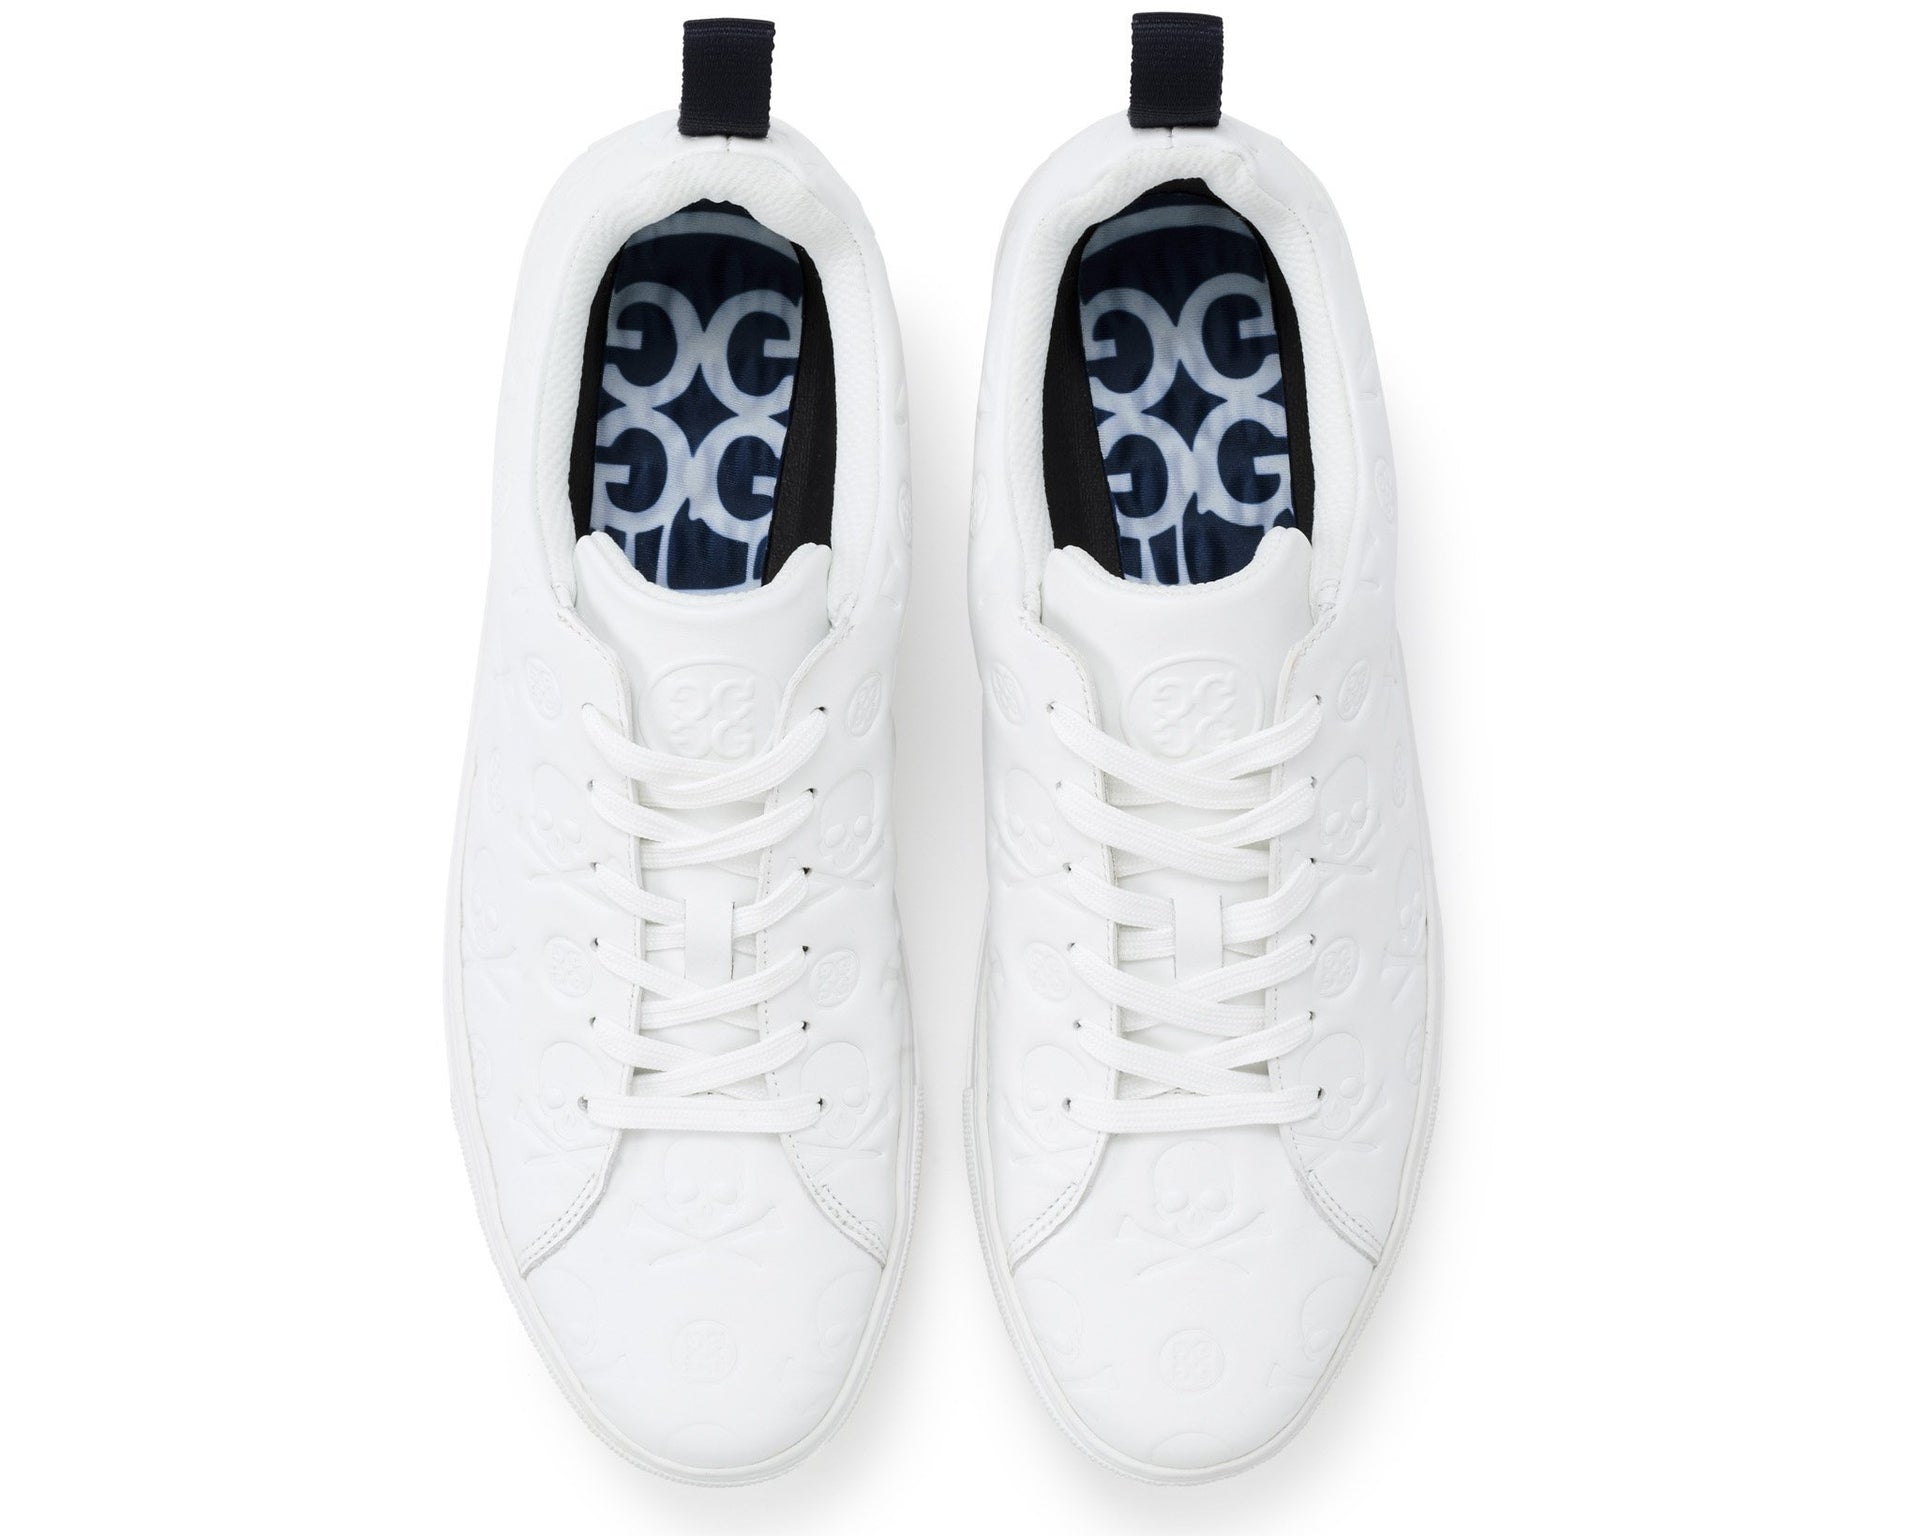 gfore skull shoes